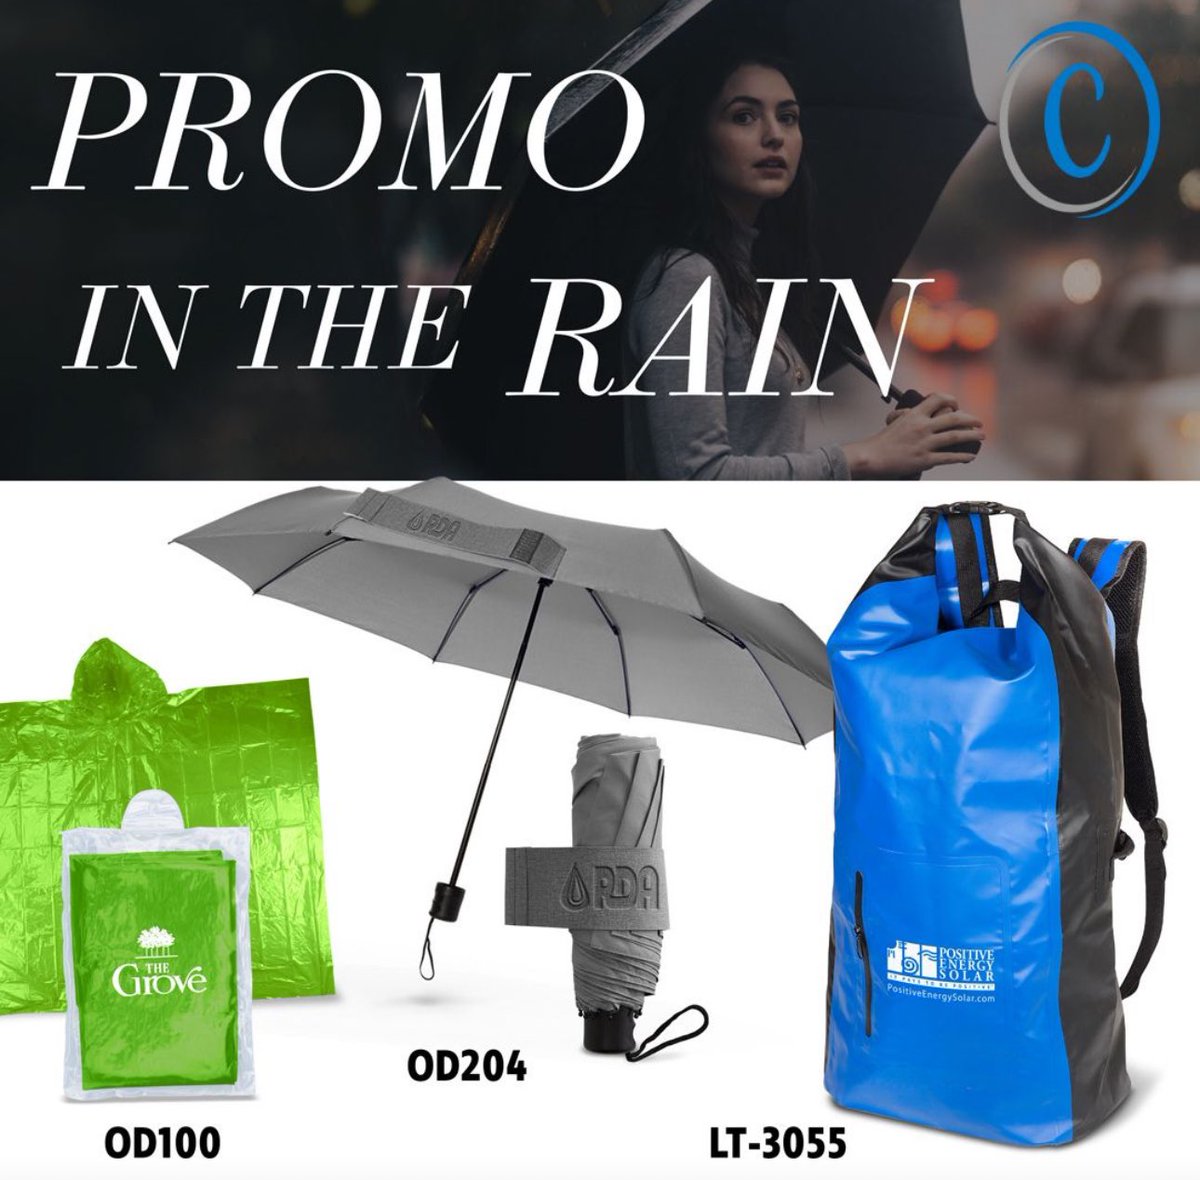 Does your #business have #promotionalproducts for those #rainydays? Coastal Promotions is ready to get your help your #company #promo in the #rain!  Reach out today for a #quote with your #businessbranding. 
.
.
#promotionalproductswork #yourlogohere #promotionalproduct #swag